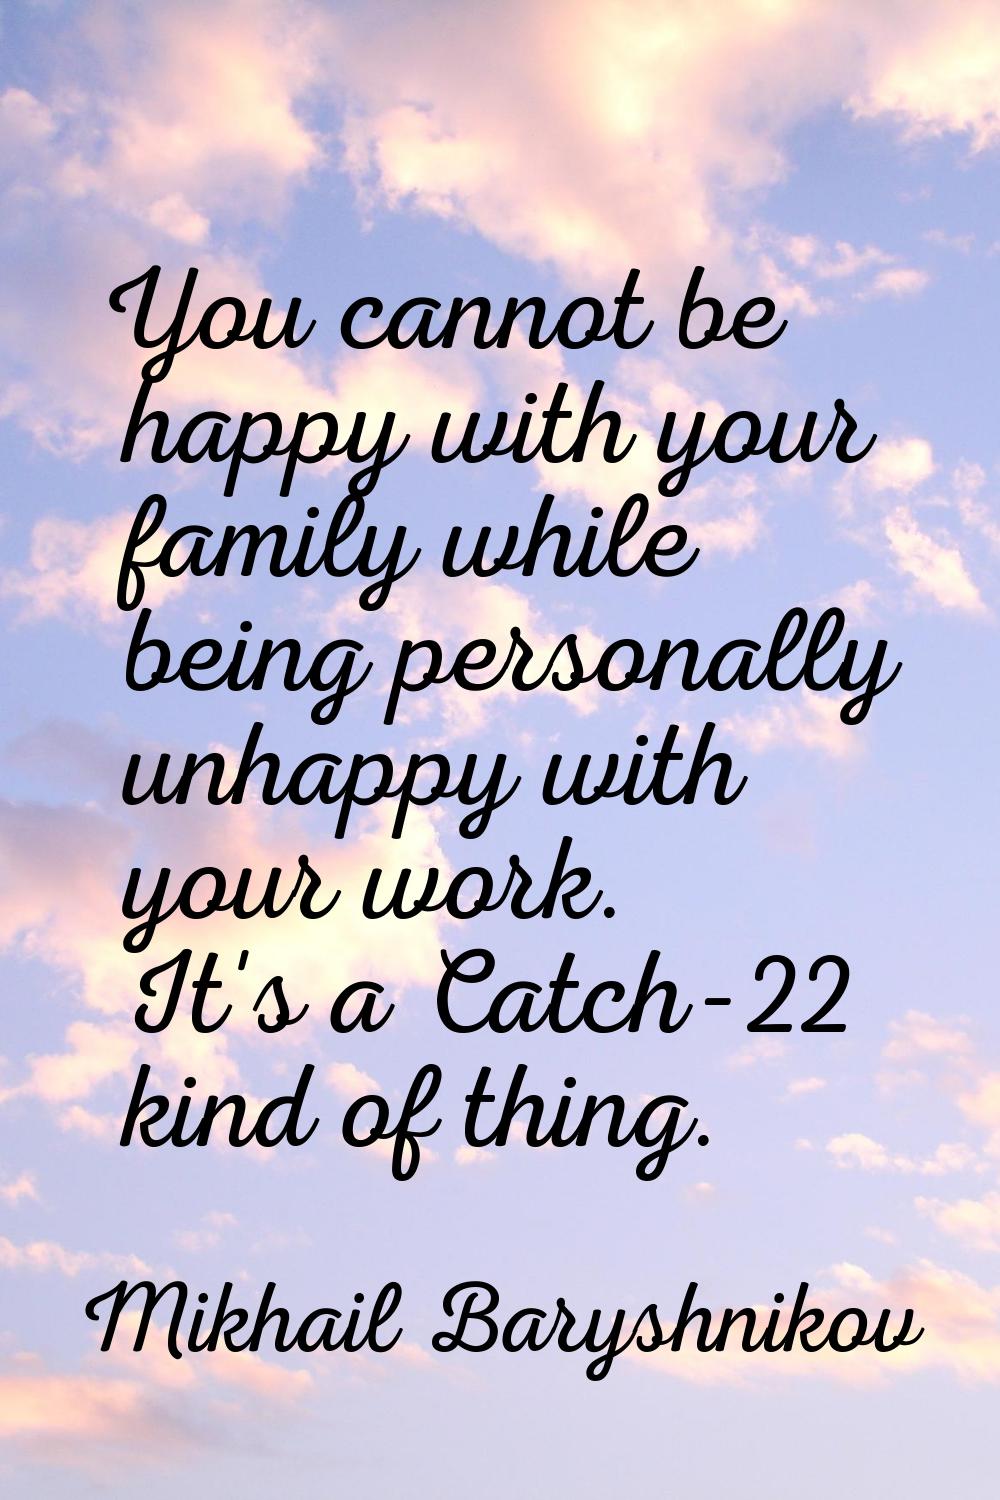 You cannot be happy with your family while being personally unhappy with your work. It's a Catch-22